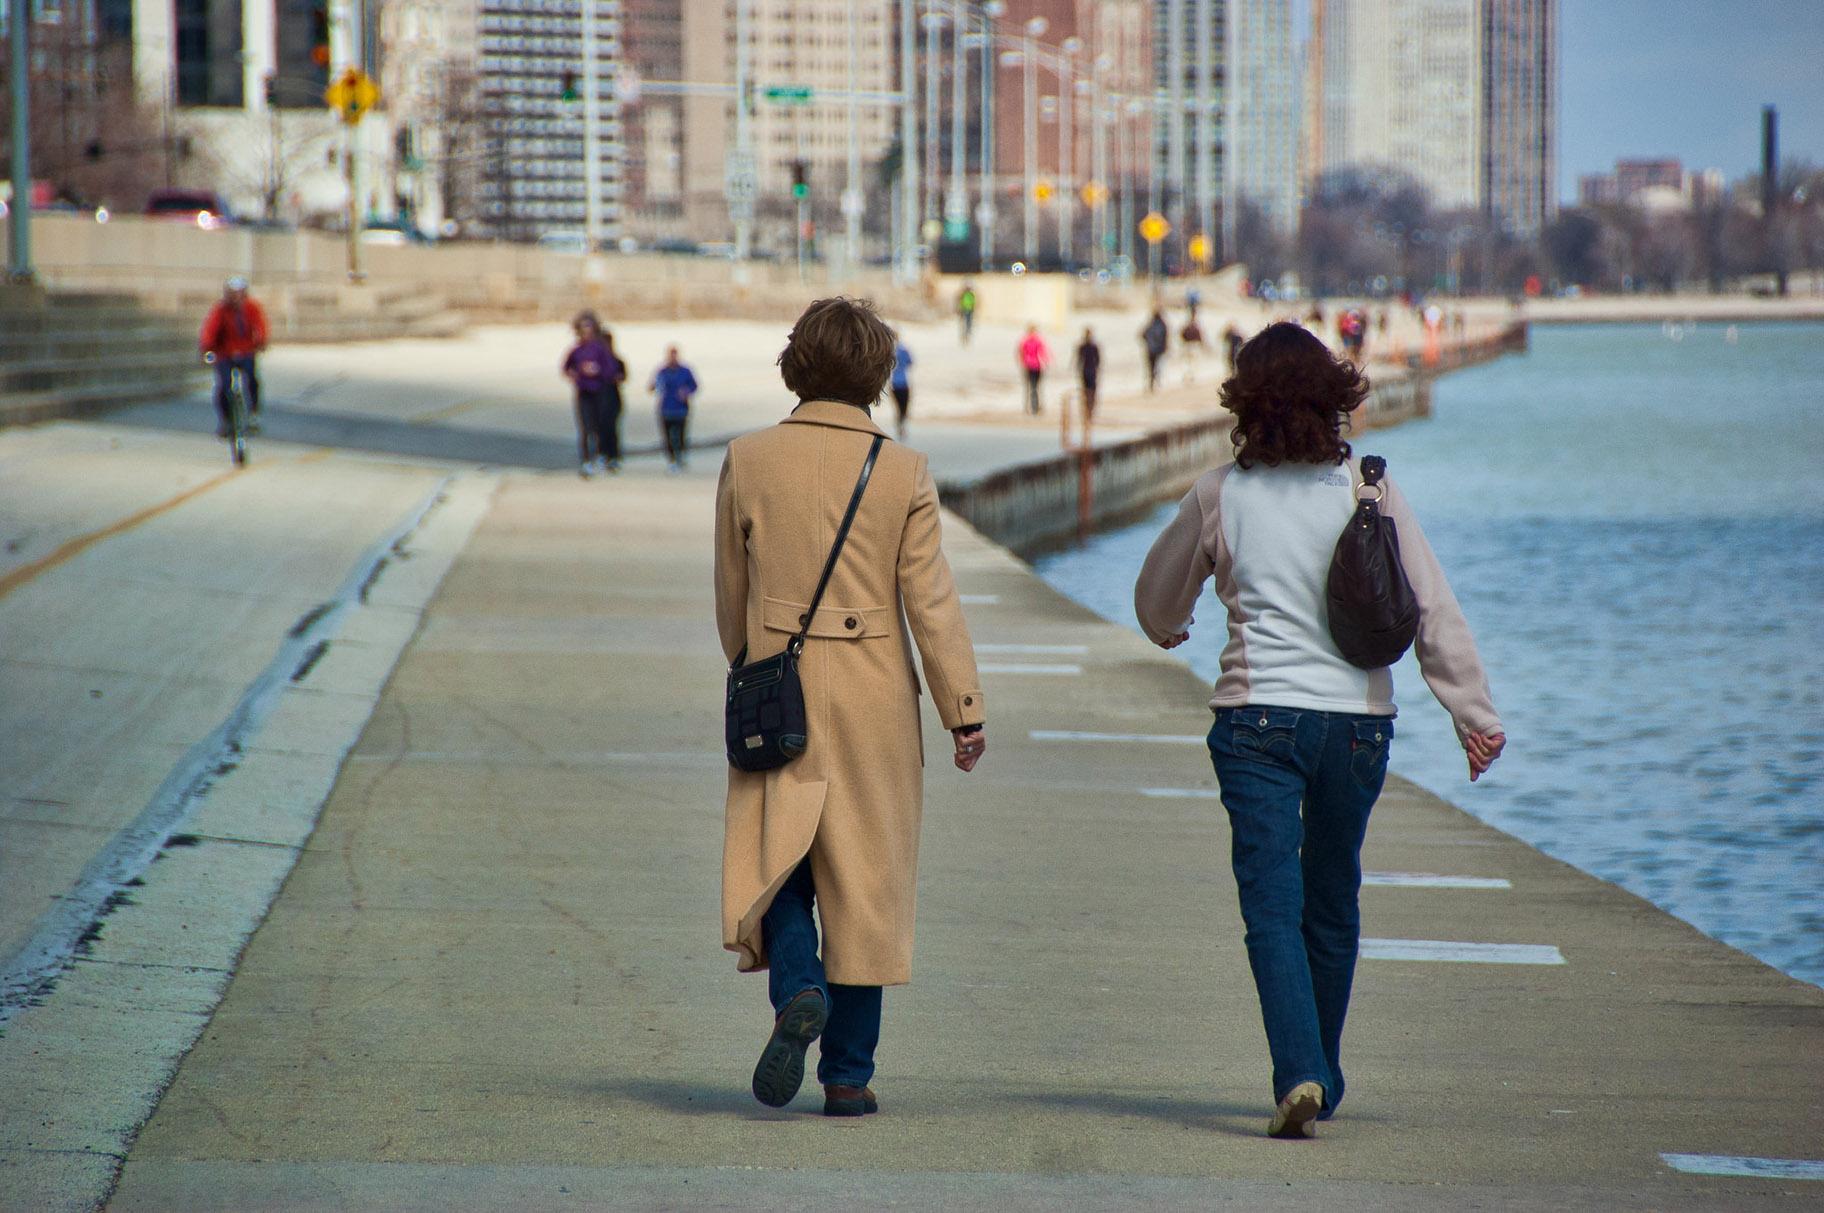 Now is not the time for a long stroll or ride along the lakefront, Mayor Lori Lightfoot said. (Eric Allix Rogers / Flickr)